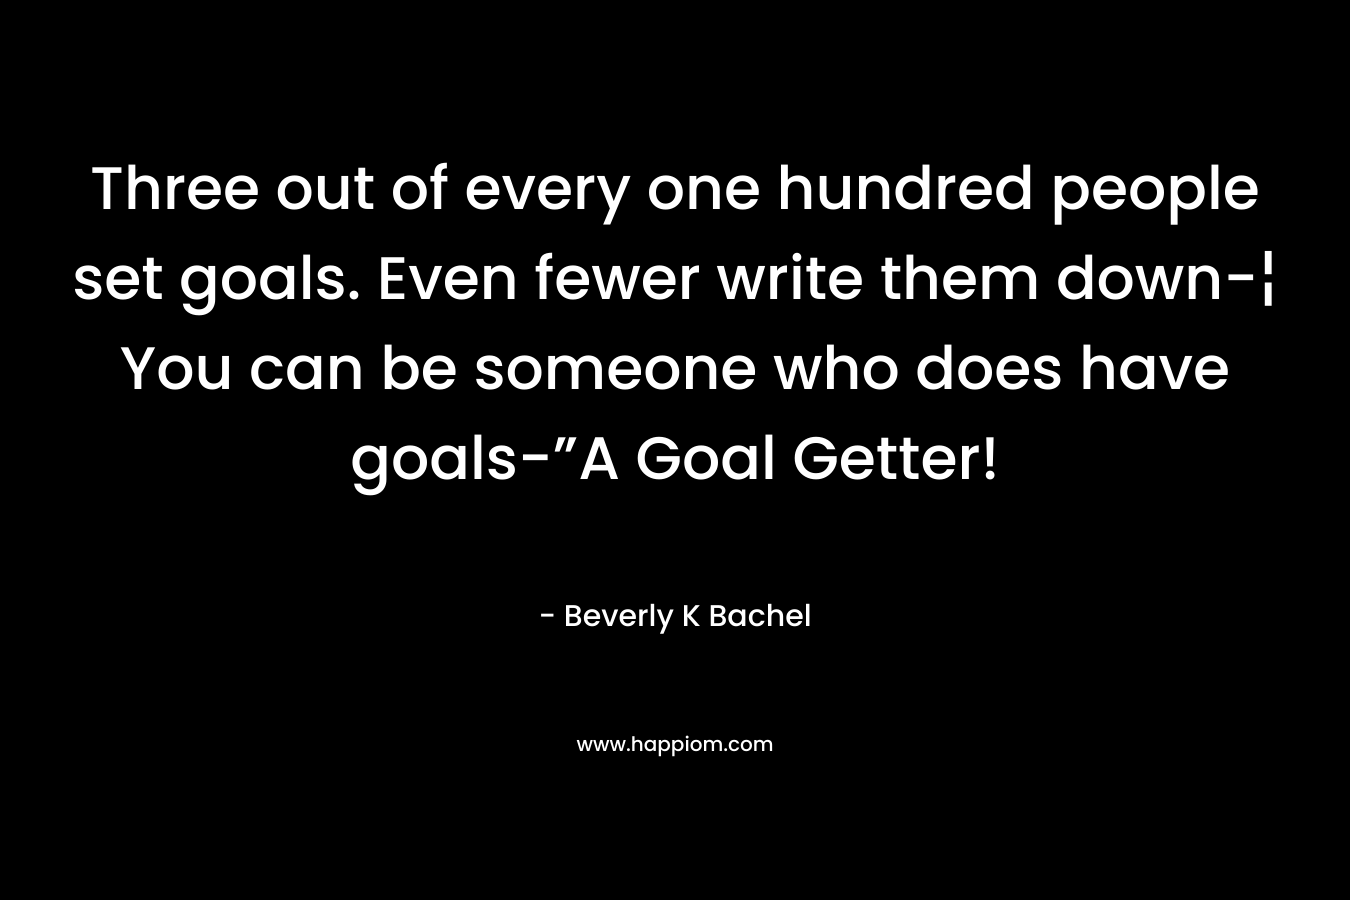 Three out of every one hundred people set goals. Even fewer write them down-¦ You can be someone who does have goals-”A Goal Getter!